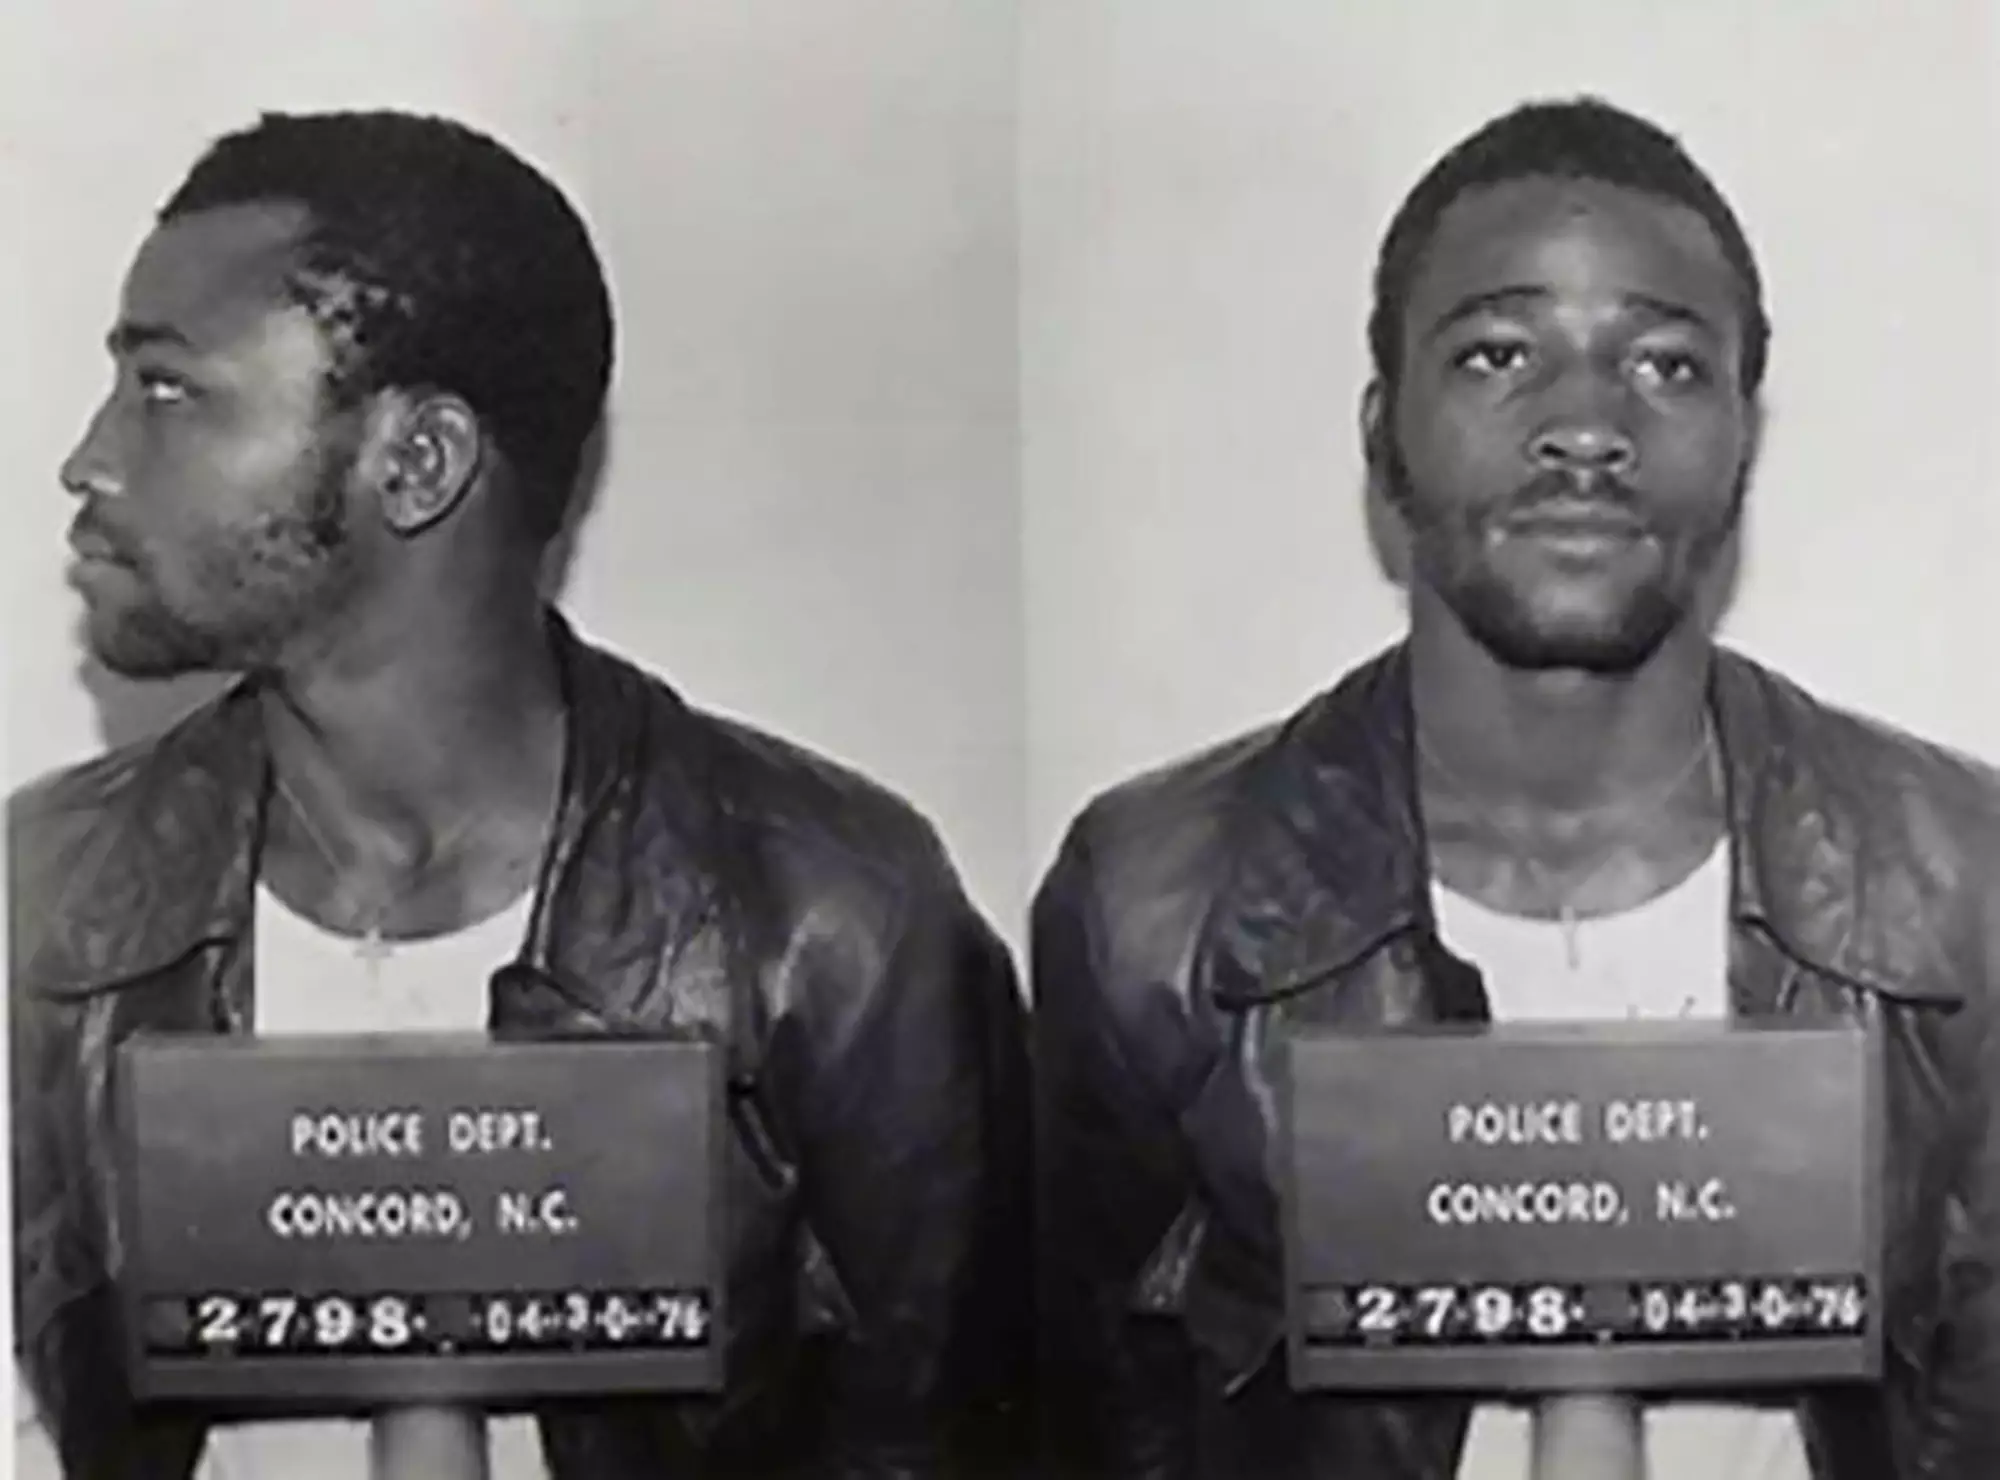 Ronnie Long was sentenced to life in prison IN 1976 for burglary and rape.